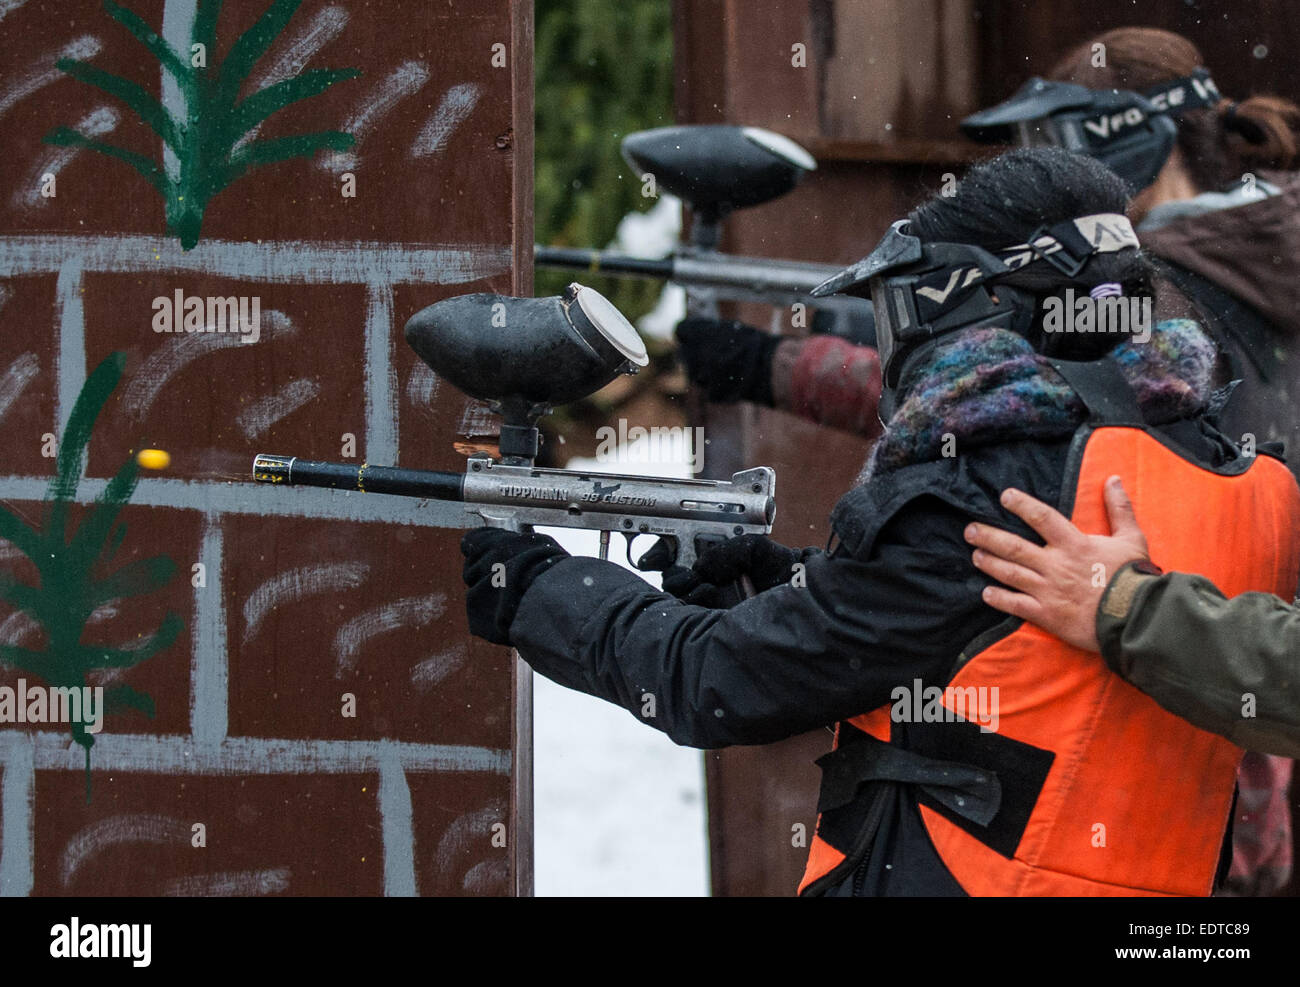 (150109) -- GUSH ETZION, Jan. 9, 2015 (Xinhua) -- A student shoots a paintball during a military and counter-terror drill at 'Caliber 3' Israeli Counter Terror and Security Academy in Gush Etzion, south of Jerusalem, on Jan. 9, 2015. One hundred China's Hong Kong students and teachers started the four-day Techcacker Lab programme jointly organized by the Li Ka Shing Foundation and the Technion-Israel Institute of Technology. The Techcracker Lab programme is designed around the Hebrew word 'chutzpah', which means fearless and audacious, and epitomizes the dedication, vigor, and tremendous succe Stock Photo